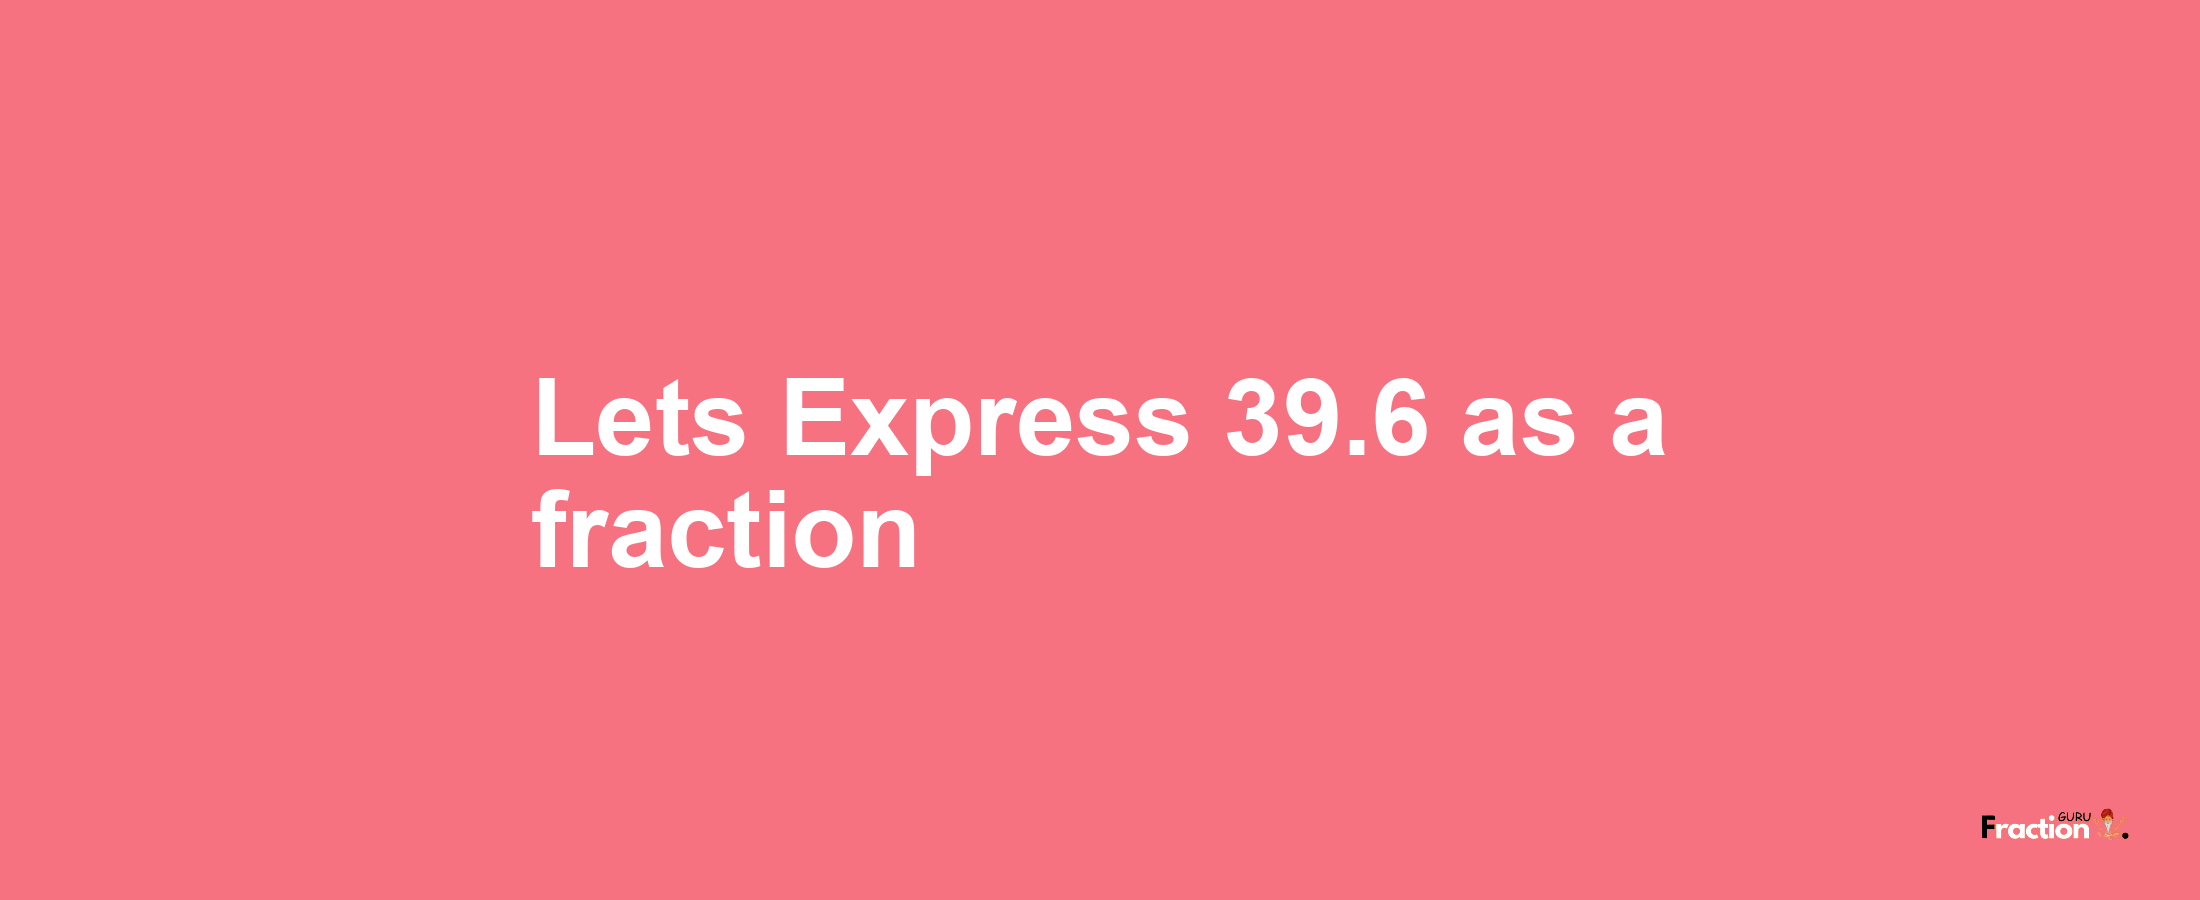 Lets Express 39.6 as afraction